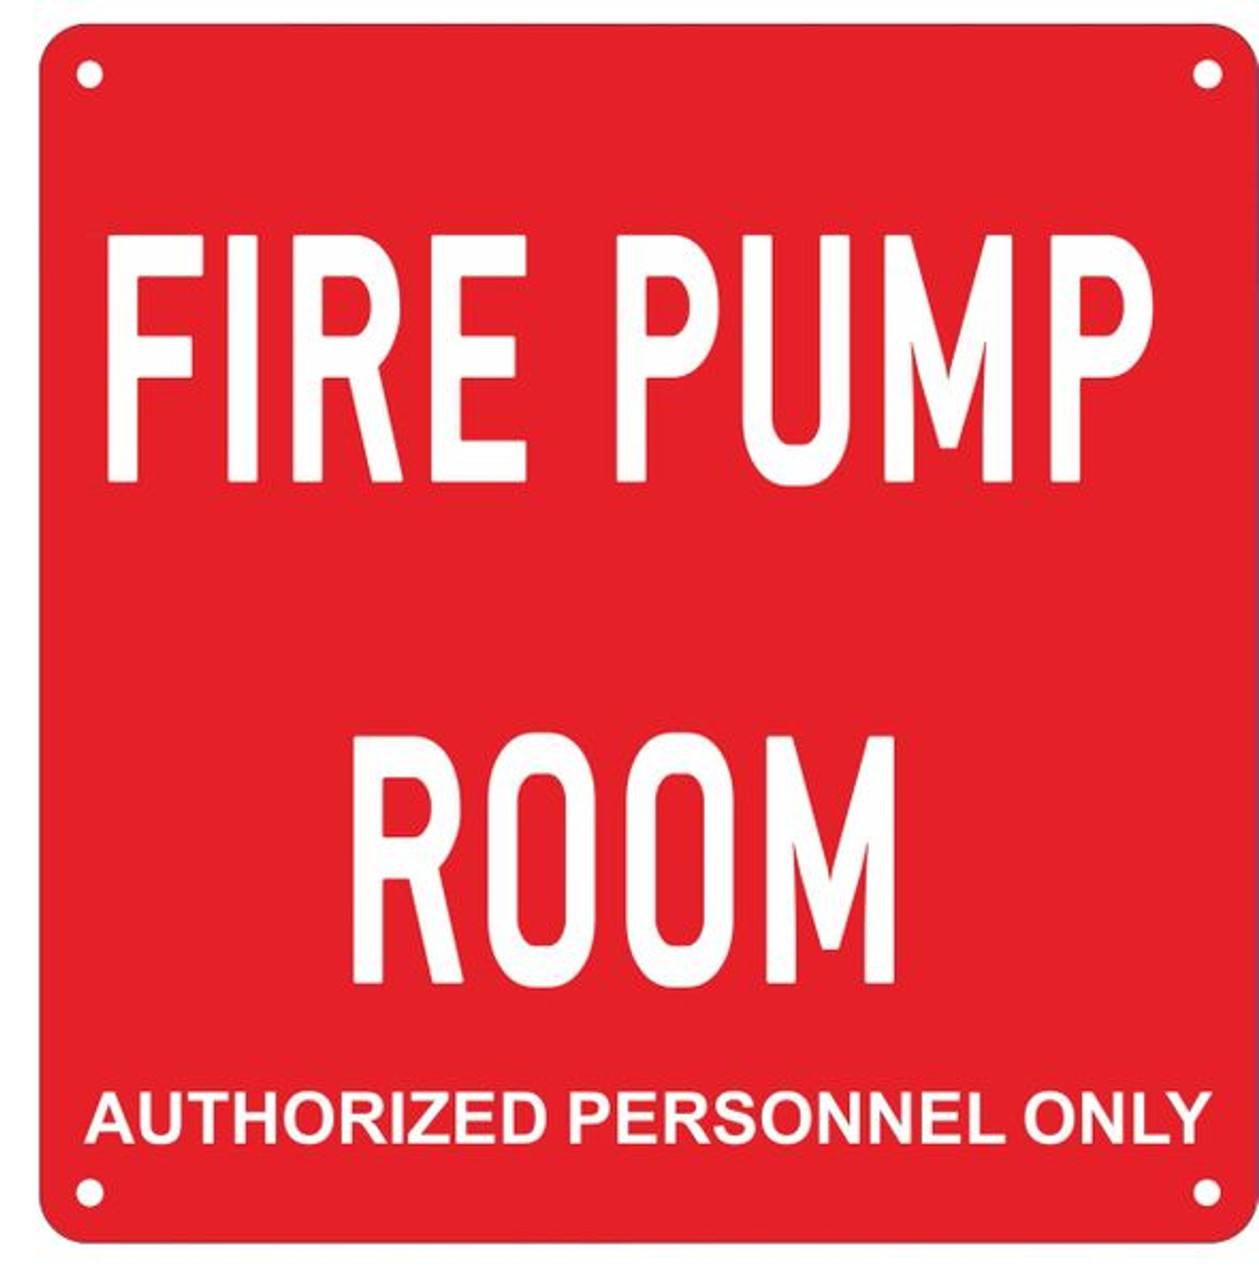 Fire Pump Room Authorized Personnel Only Sign Red Aluminum Aluminum Signs 10x10